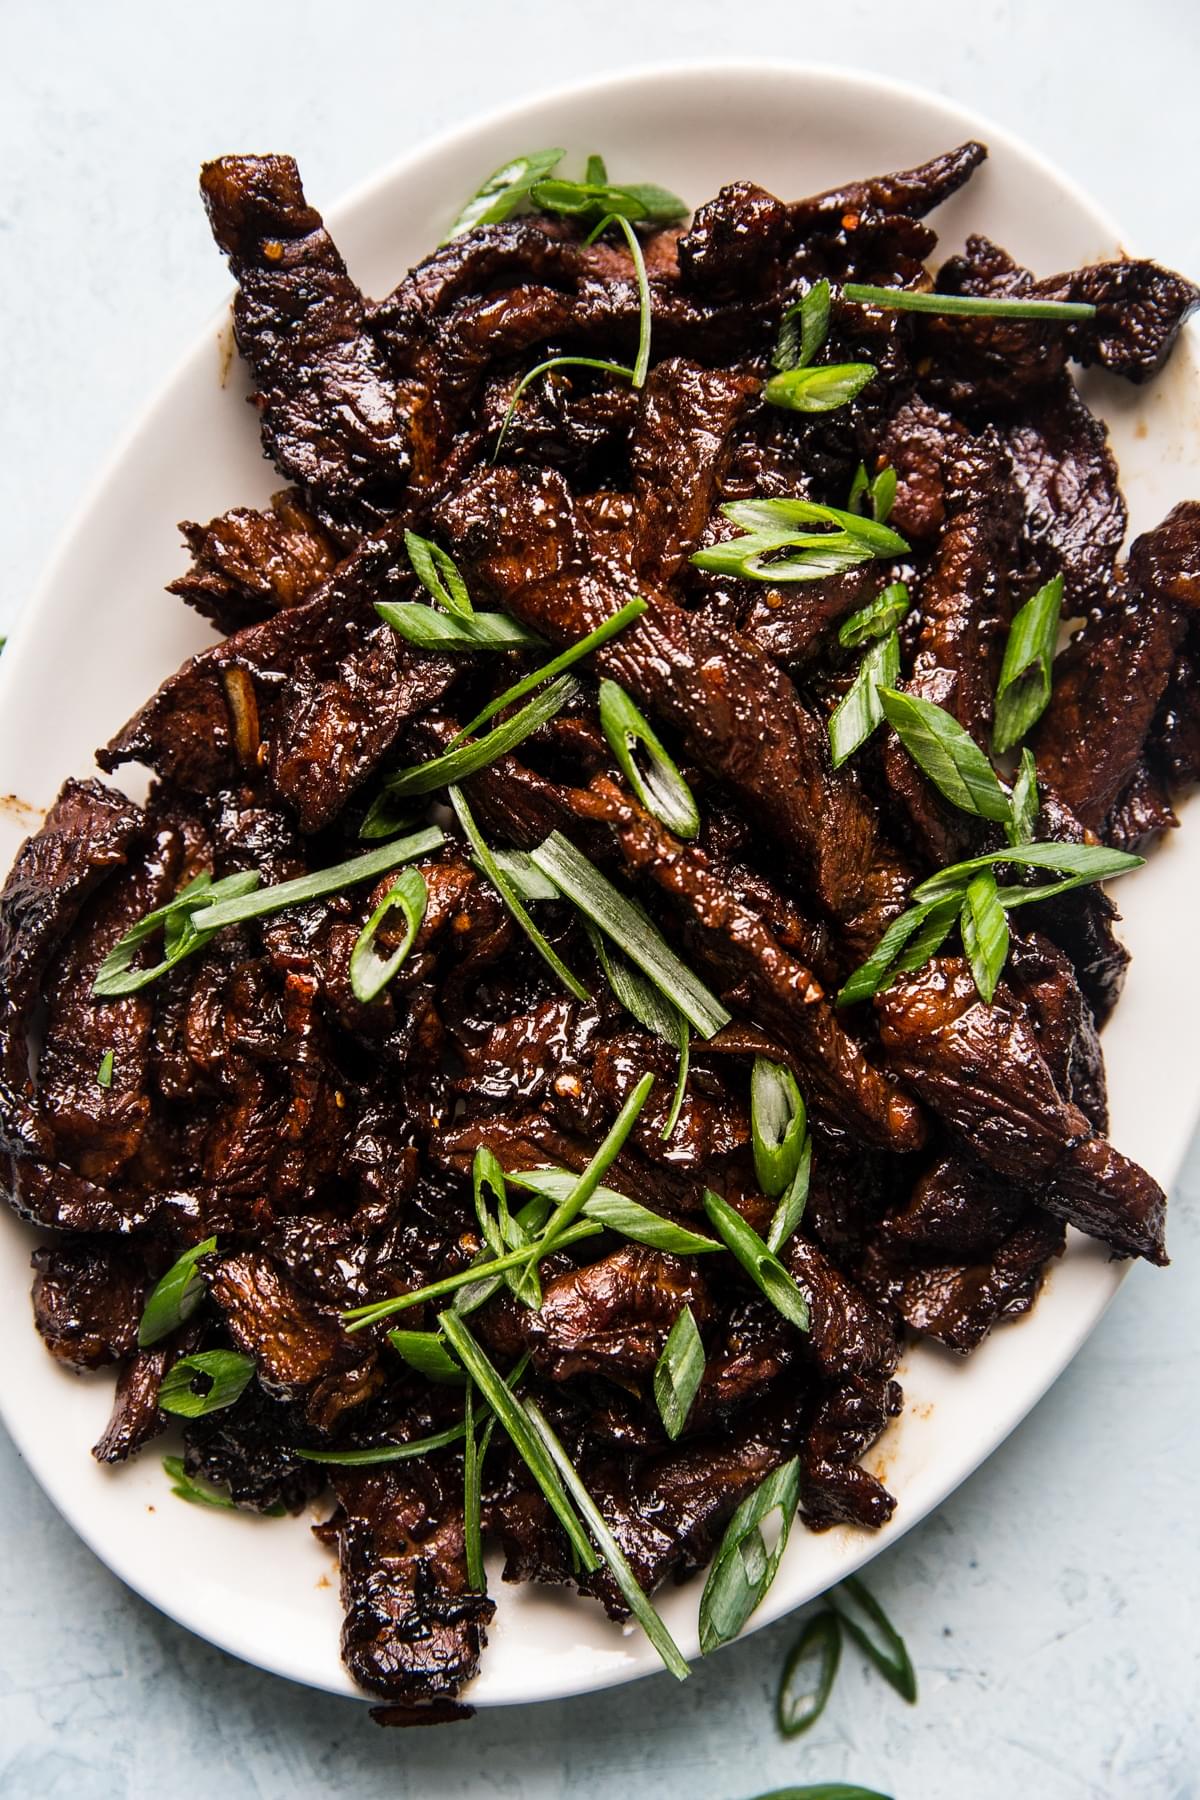 homemade Beef bulgogi sprinkled with green onions on a serving plate